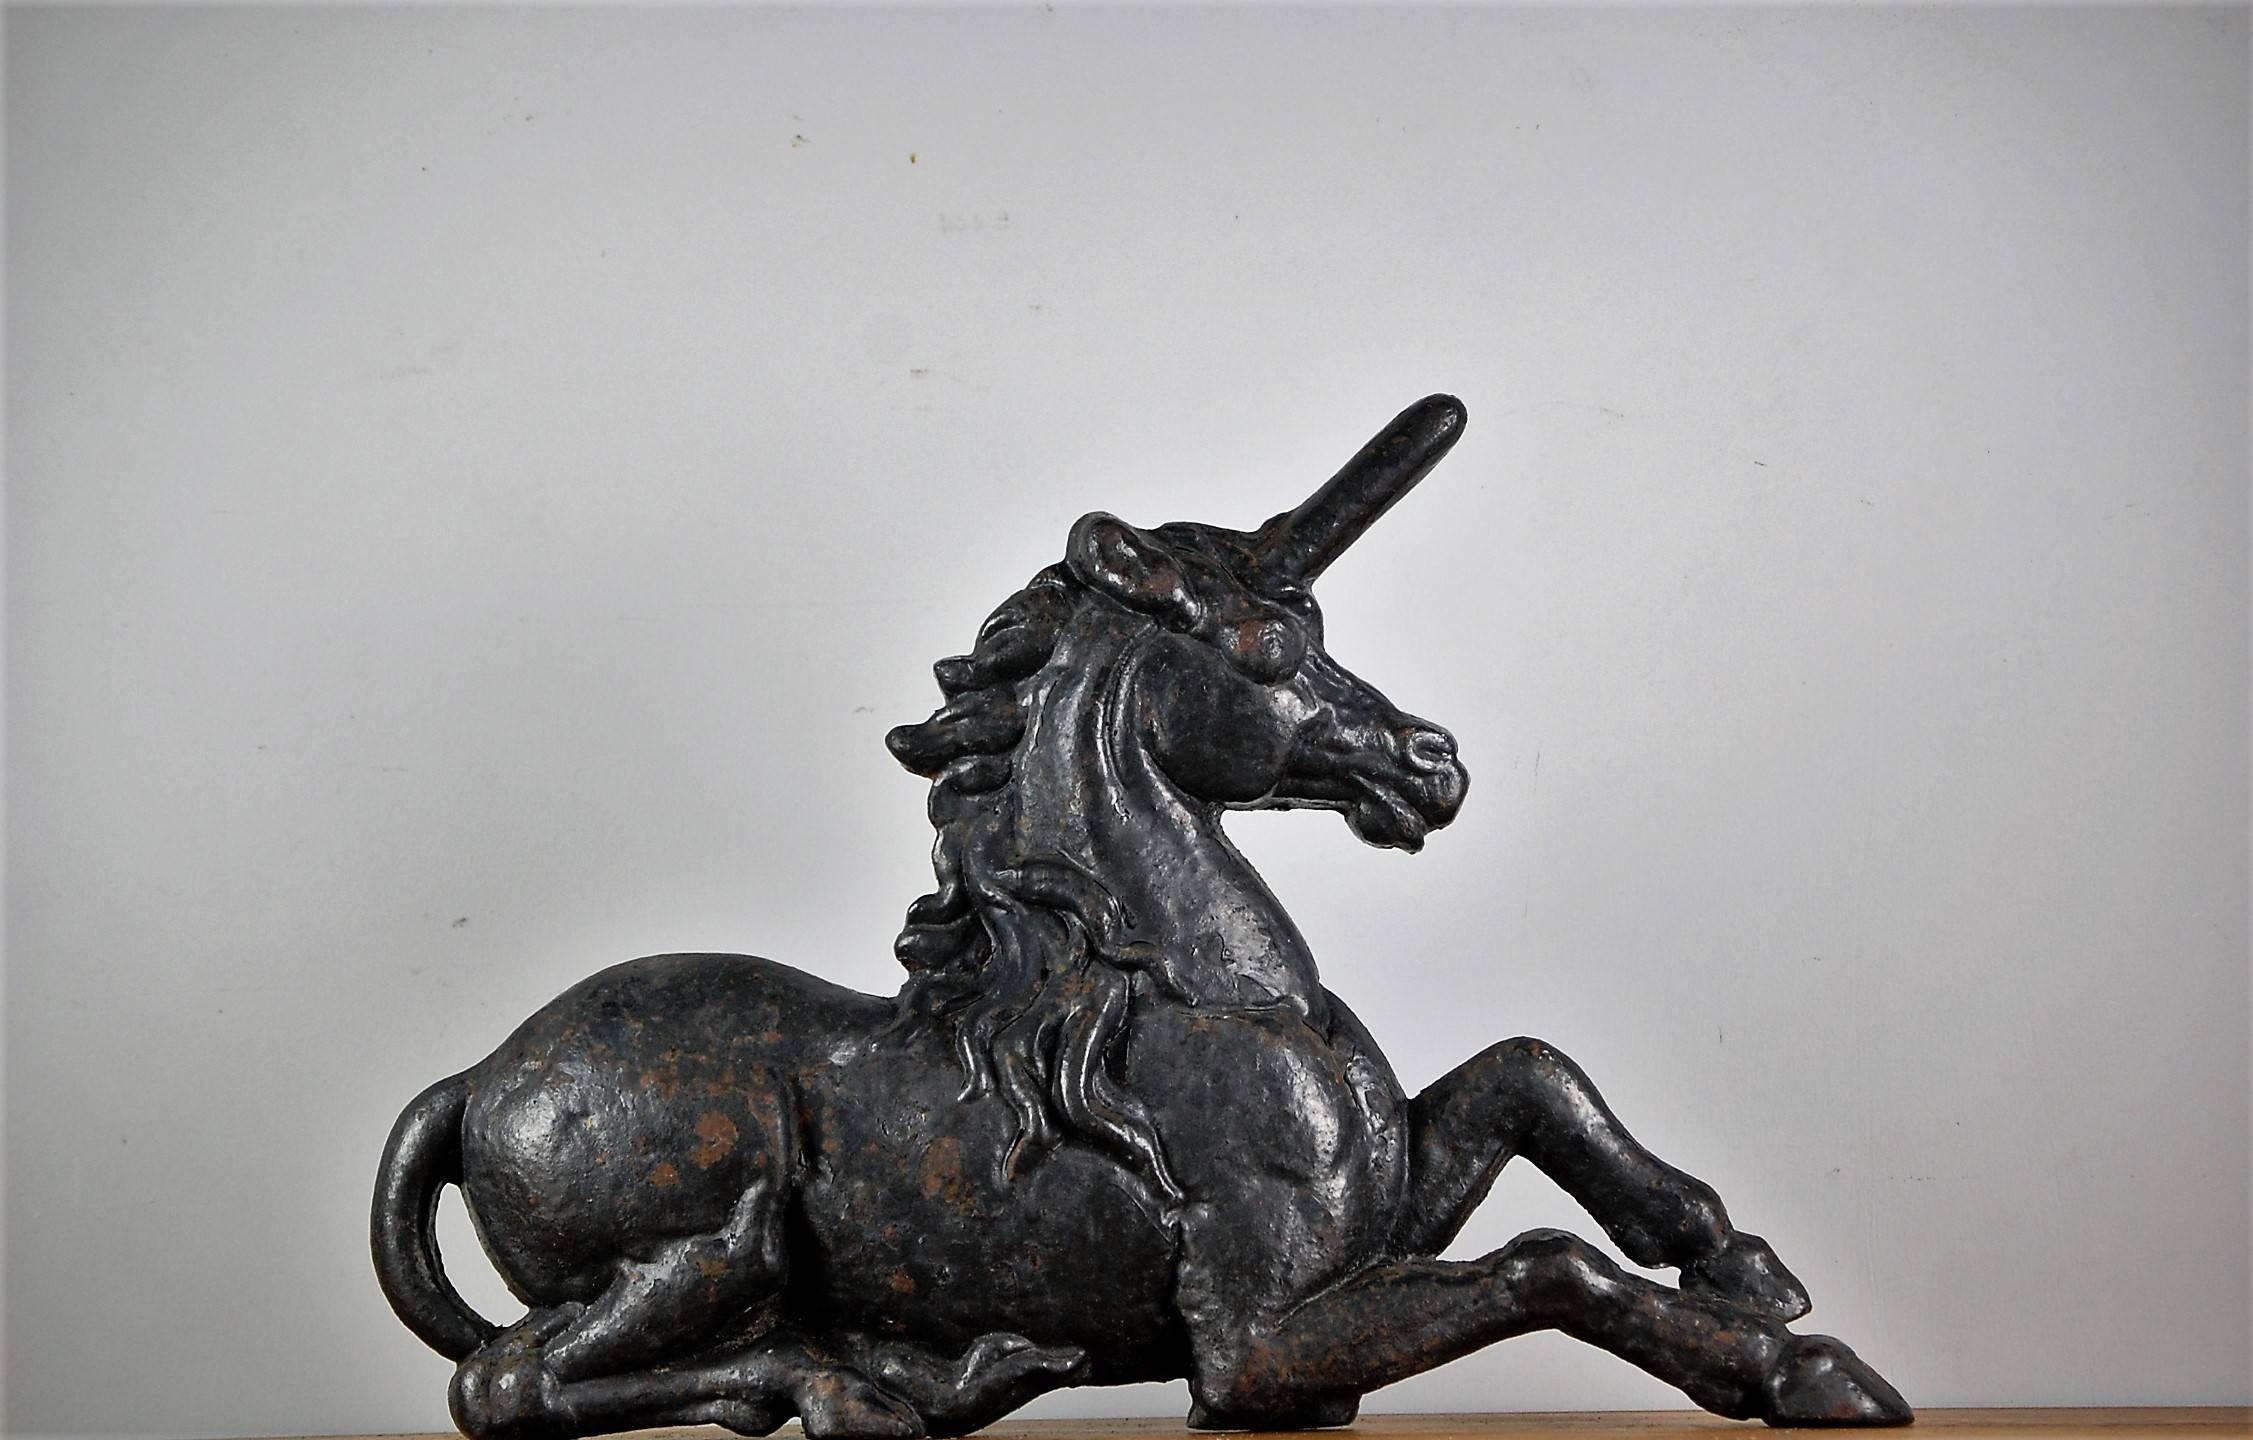 19th century cast iron fireside unicorn, design attributed to John Crowley of Sheffield, UK. Representing the Scottish unicorn in the royal coat of arms. High quality casting, commonly used as a door stop. Distressed painted finish.